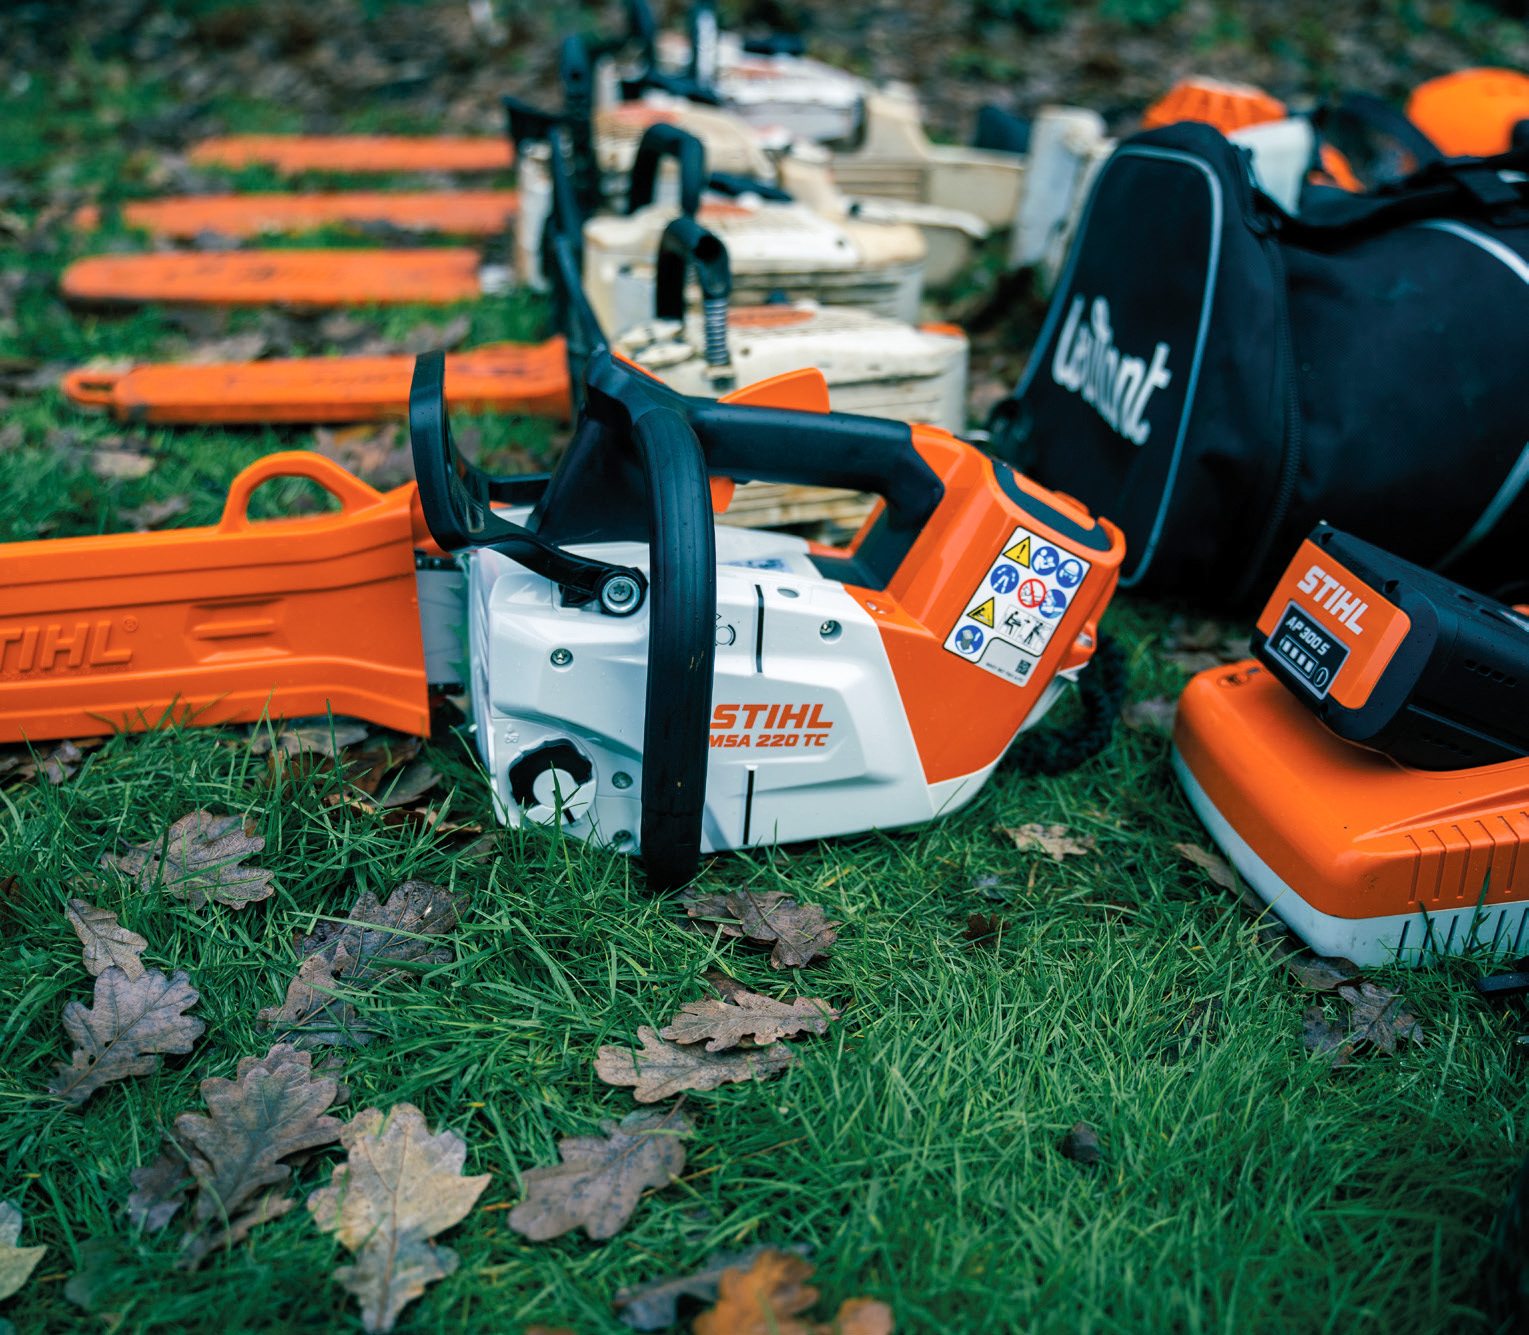 Stihl MS 220T and charging system.